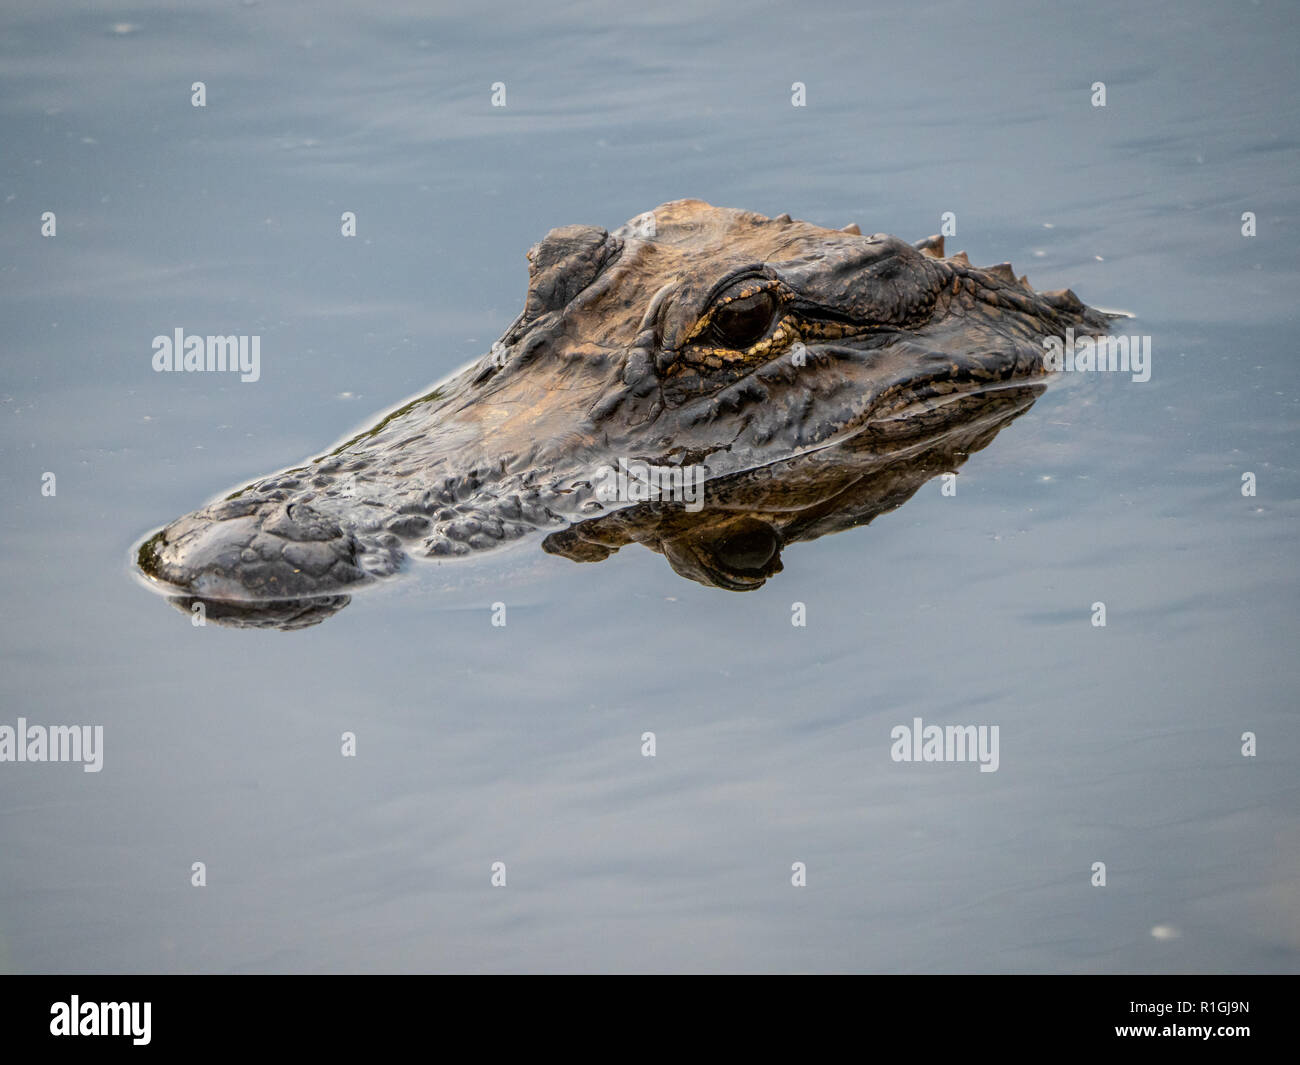 Aligator ( A mississippiensis ) in characteristic swimming position with head just above the water - Savannah National Wildlife Refuge S Carolina USA Stock Photo